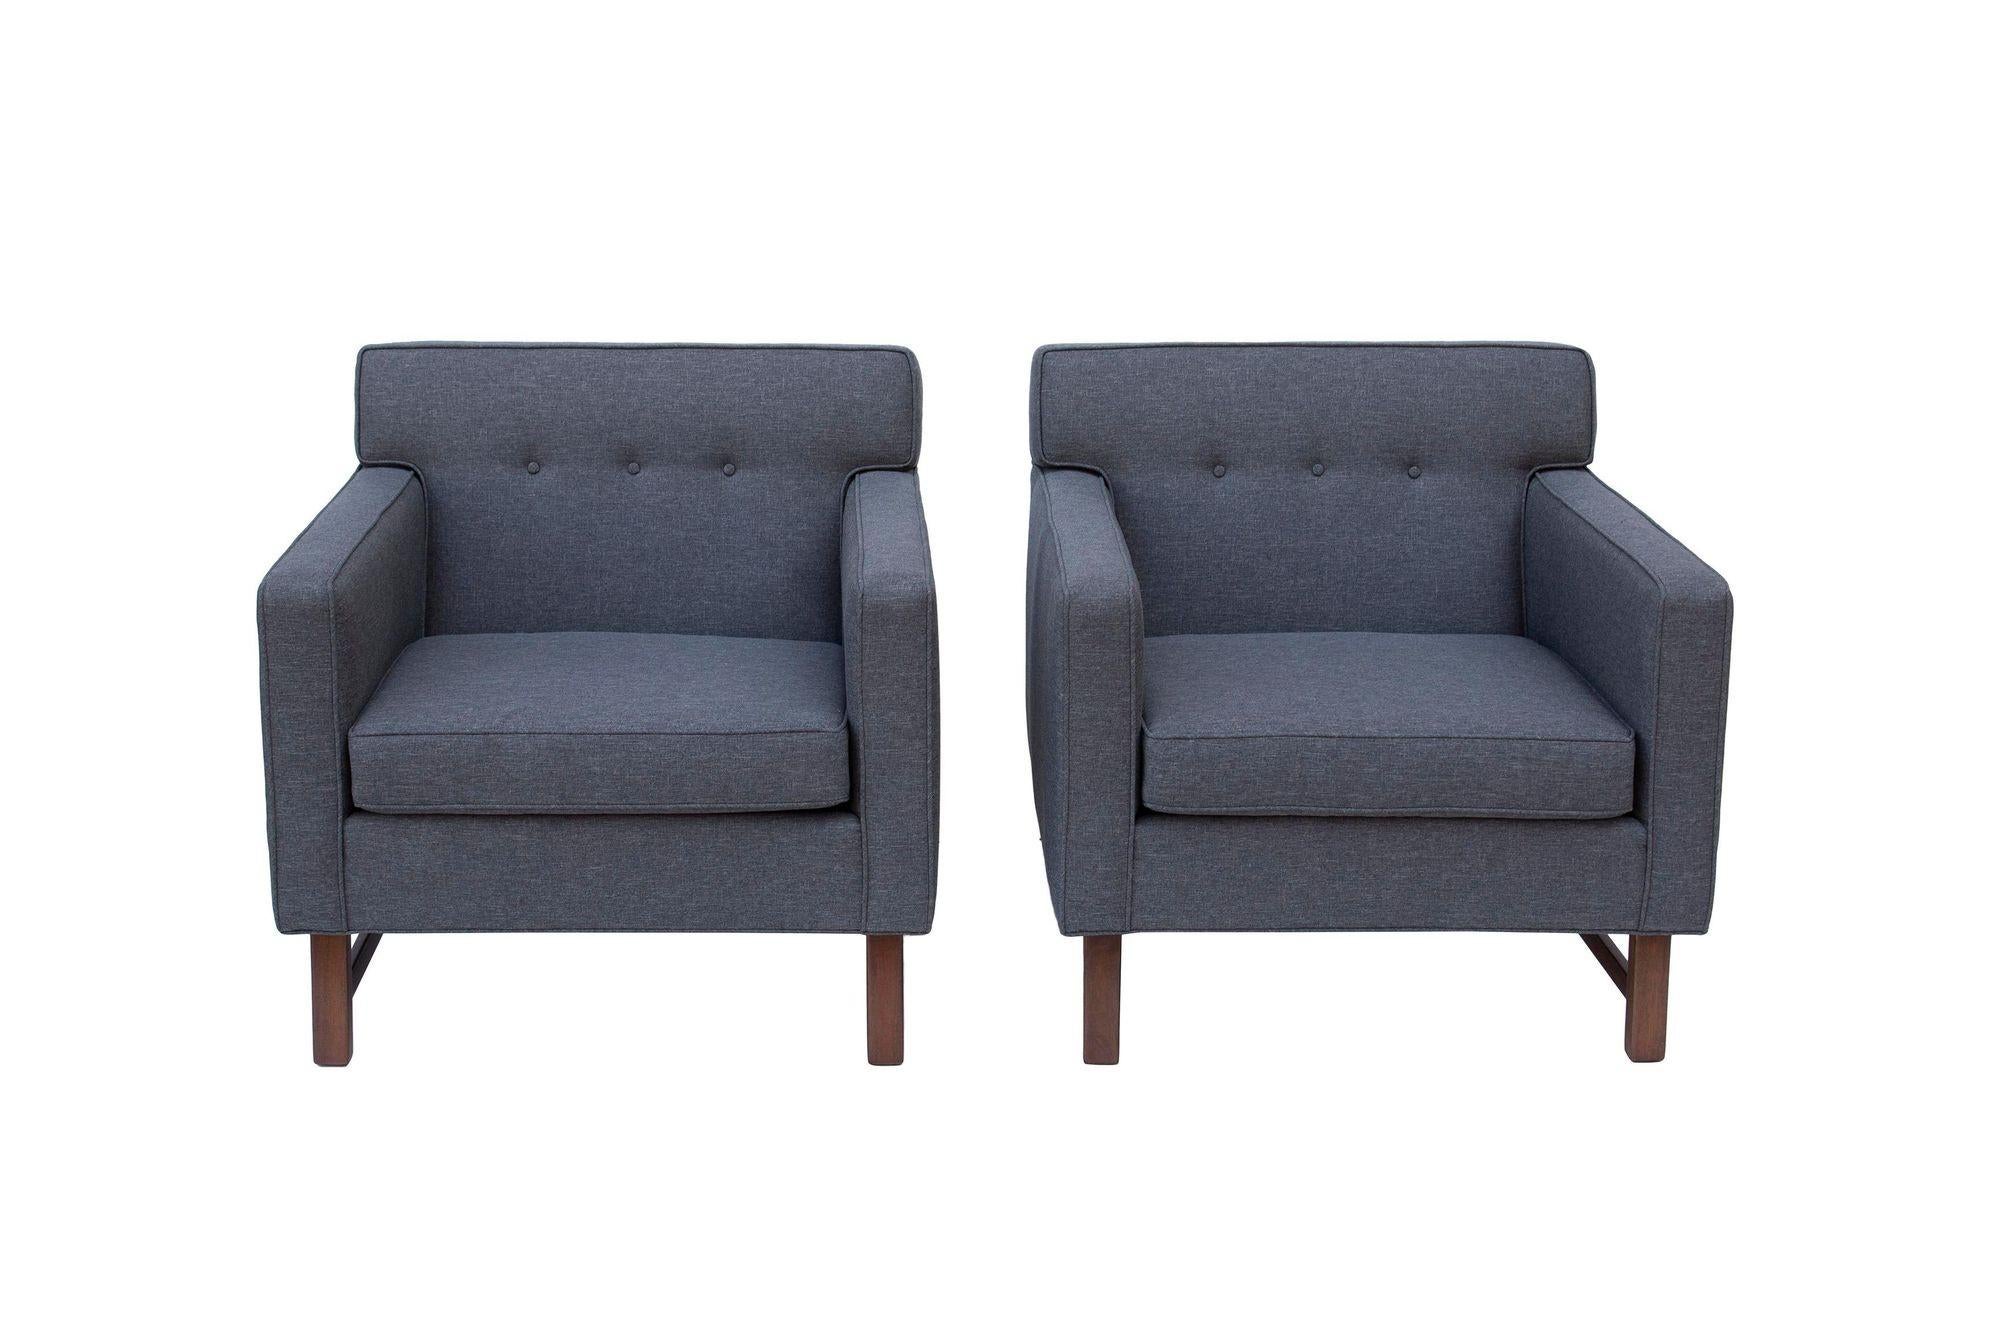 USA, 1950s
Great pair of tufted midcentury armchairs made by The Franklin Furniture Co. of Columbiana, OH. These look very much like Dunbar. Newly reupholstered with all new foam; the walnut bases have been serviced and refinished. These are